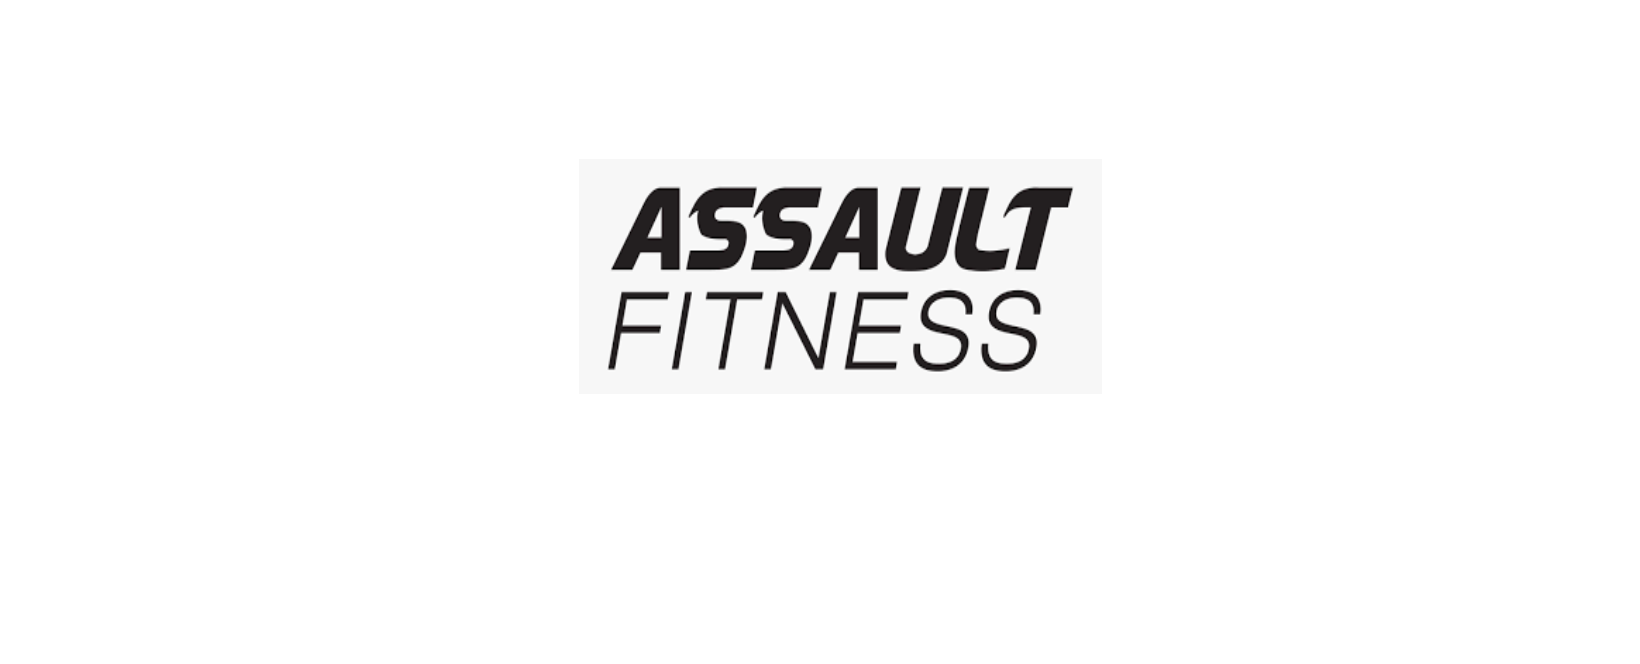 Assault Fitness Review – Get the Best for the Price!